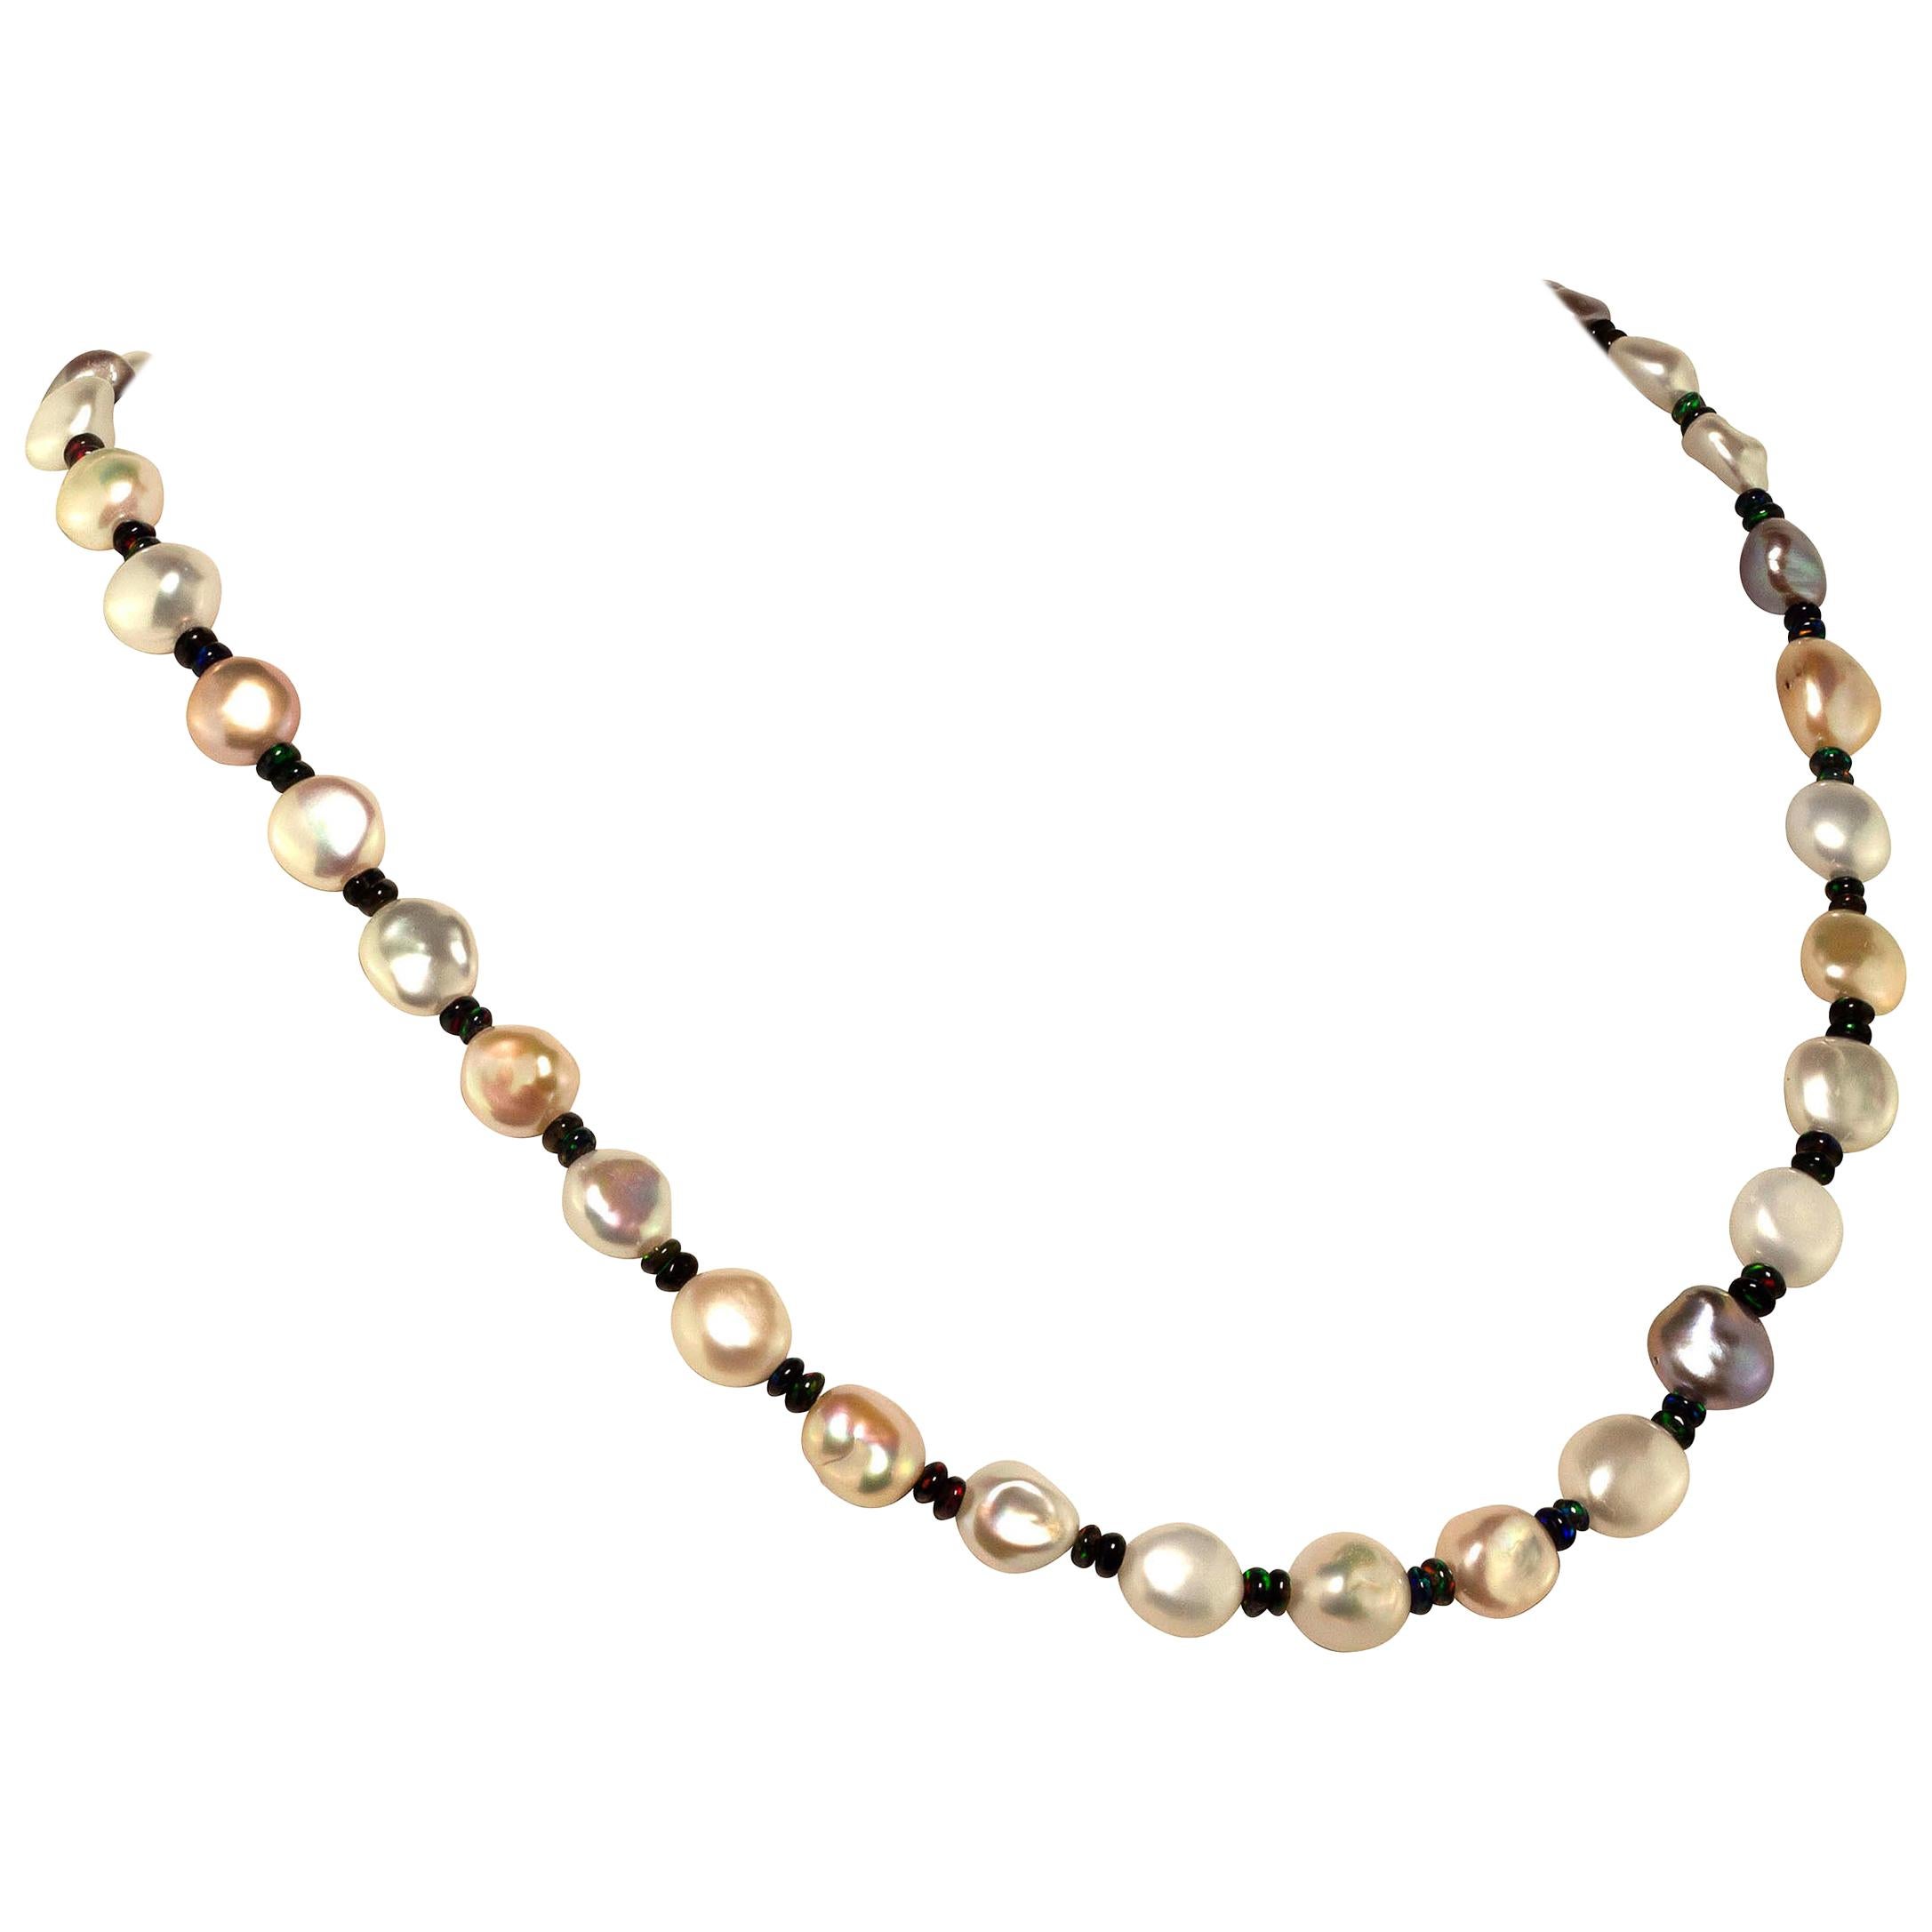 Glowing, Freshwater Pearl Necklace with Black Opal Accents